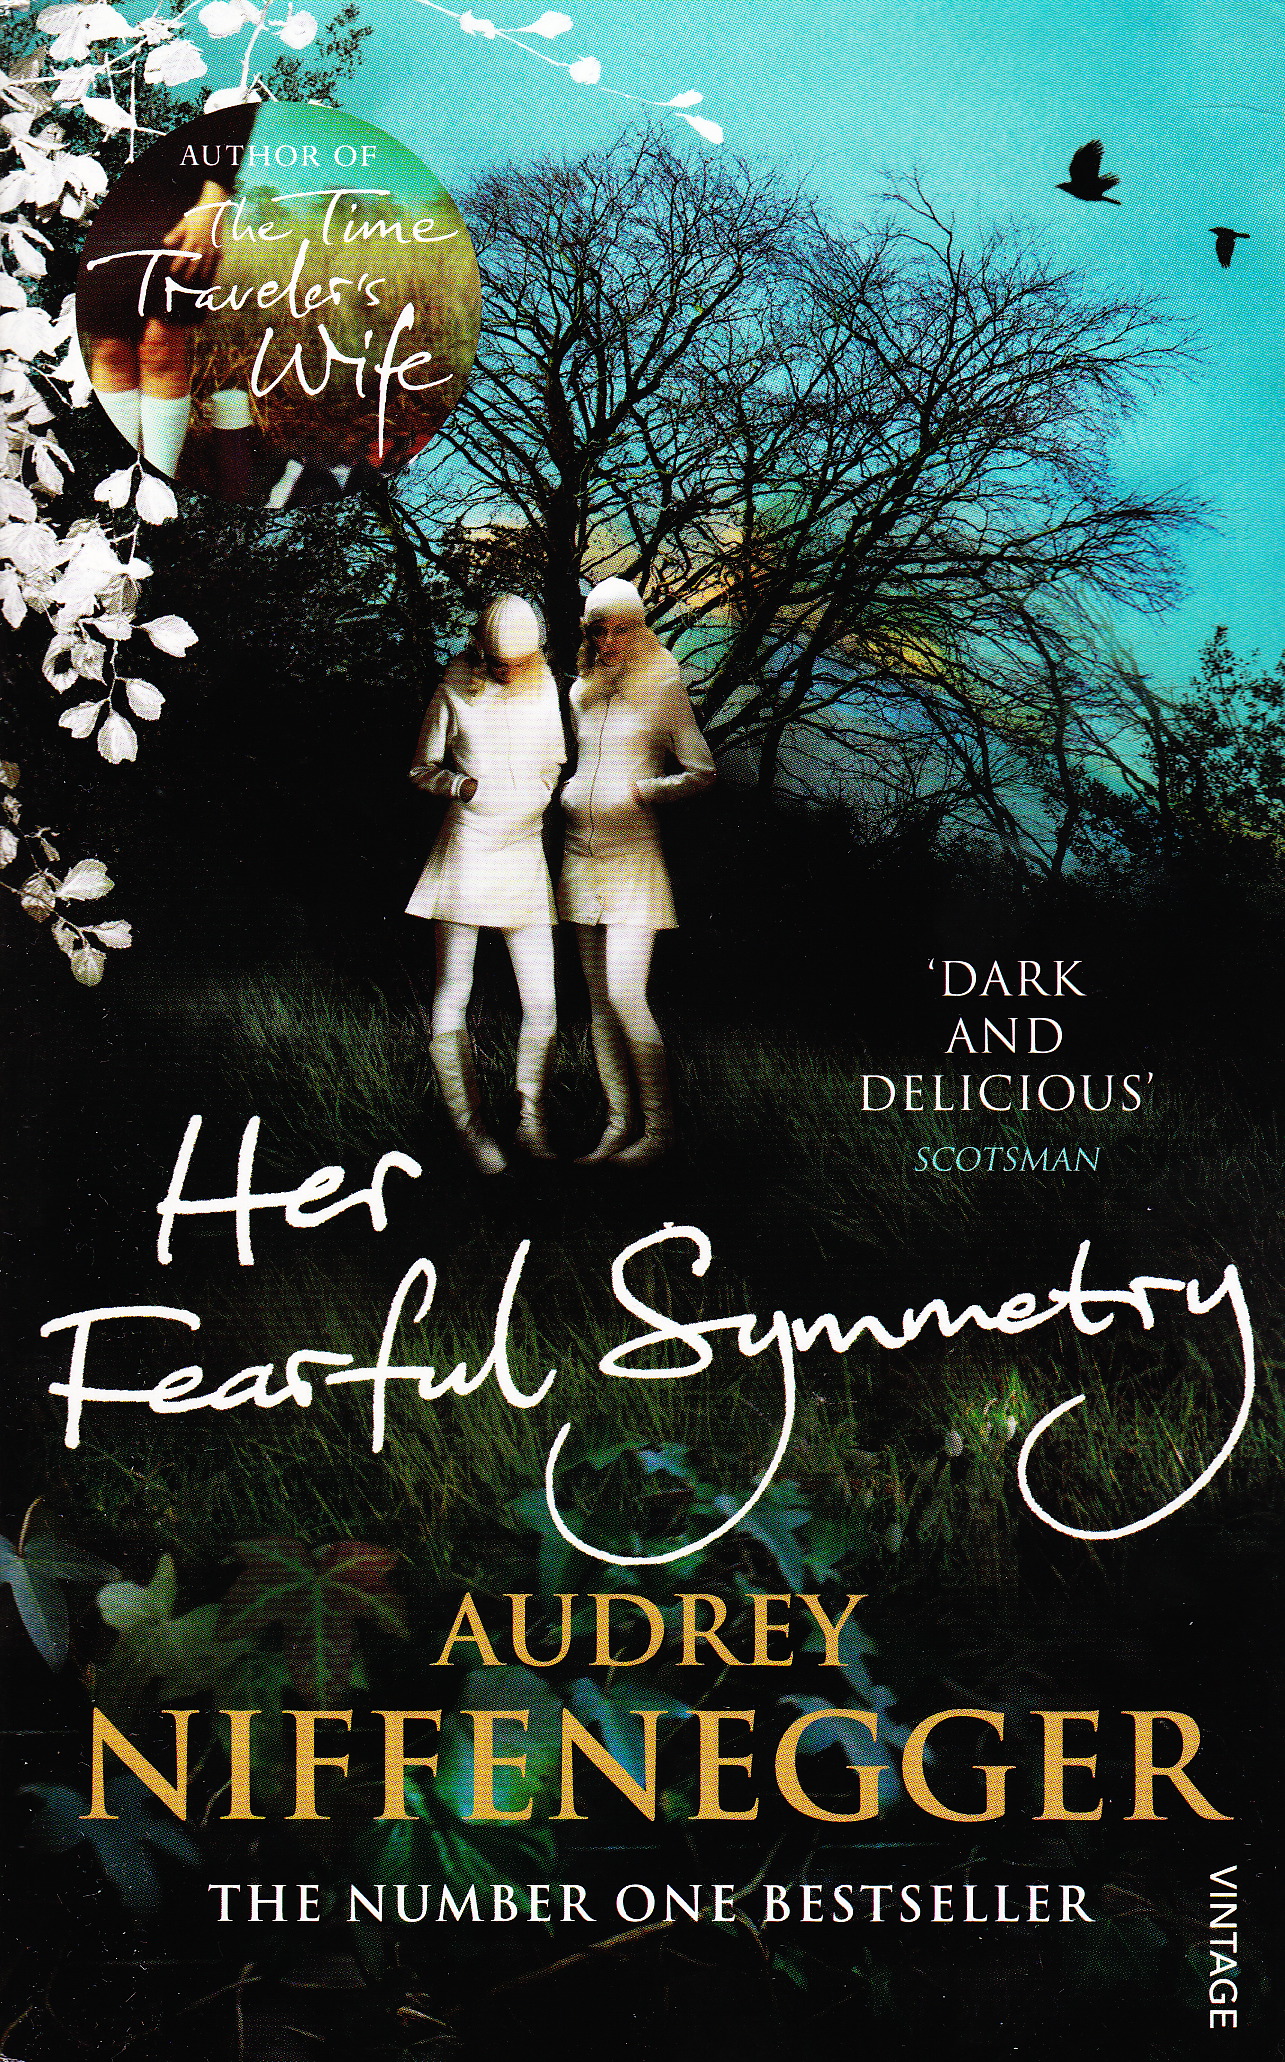 Book Review: Her Fearful Symmetry, by Audrey Niffenegger